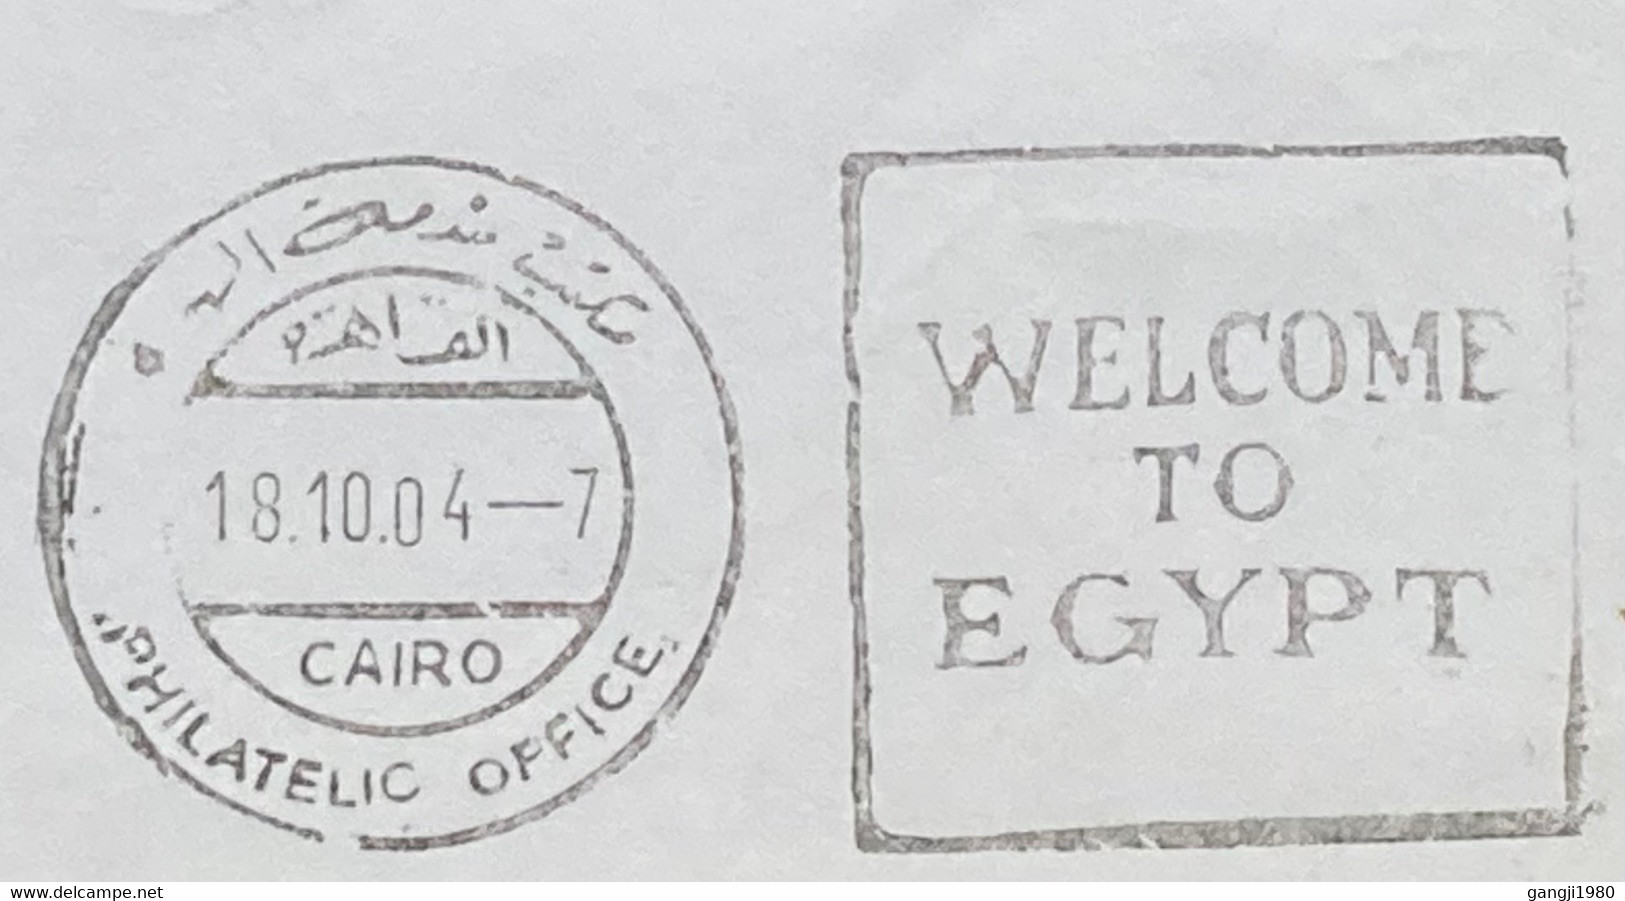 EGYPT 2004, USED COVER TO INDIA,  MISSENT TO BANGKOK THAILAND, BOXED, WELCOME TO EGYPT,  MACHINE SLOGAN - Covers & Documents